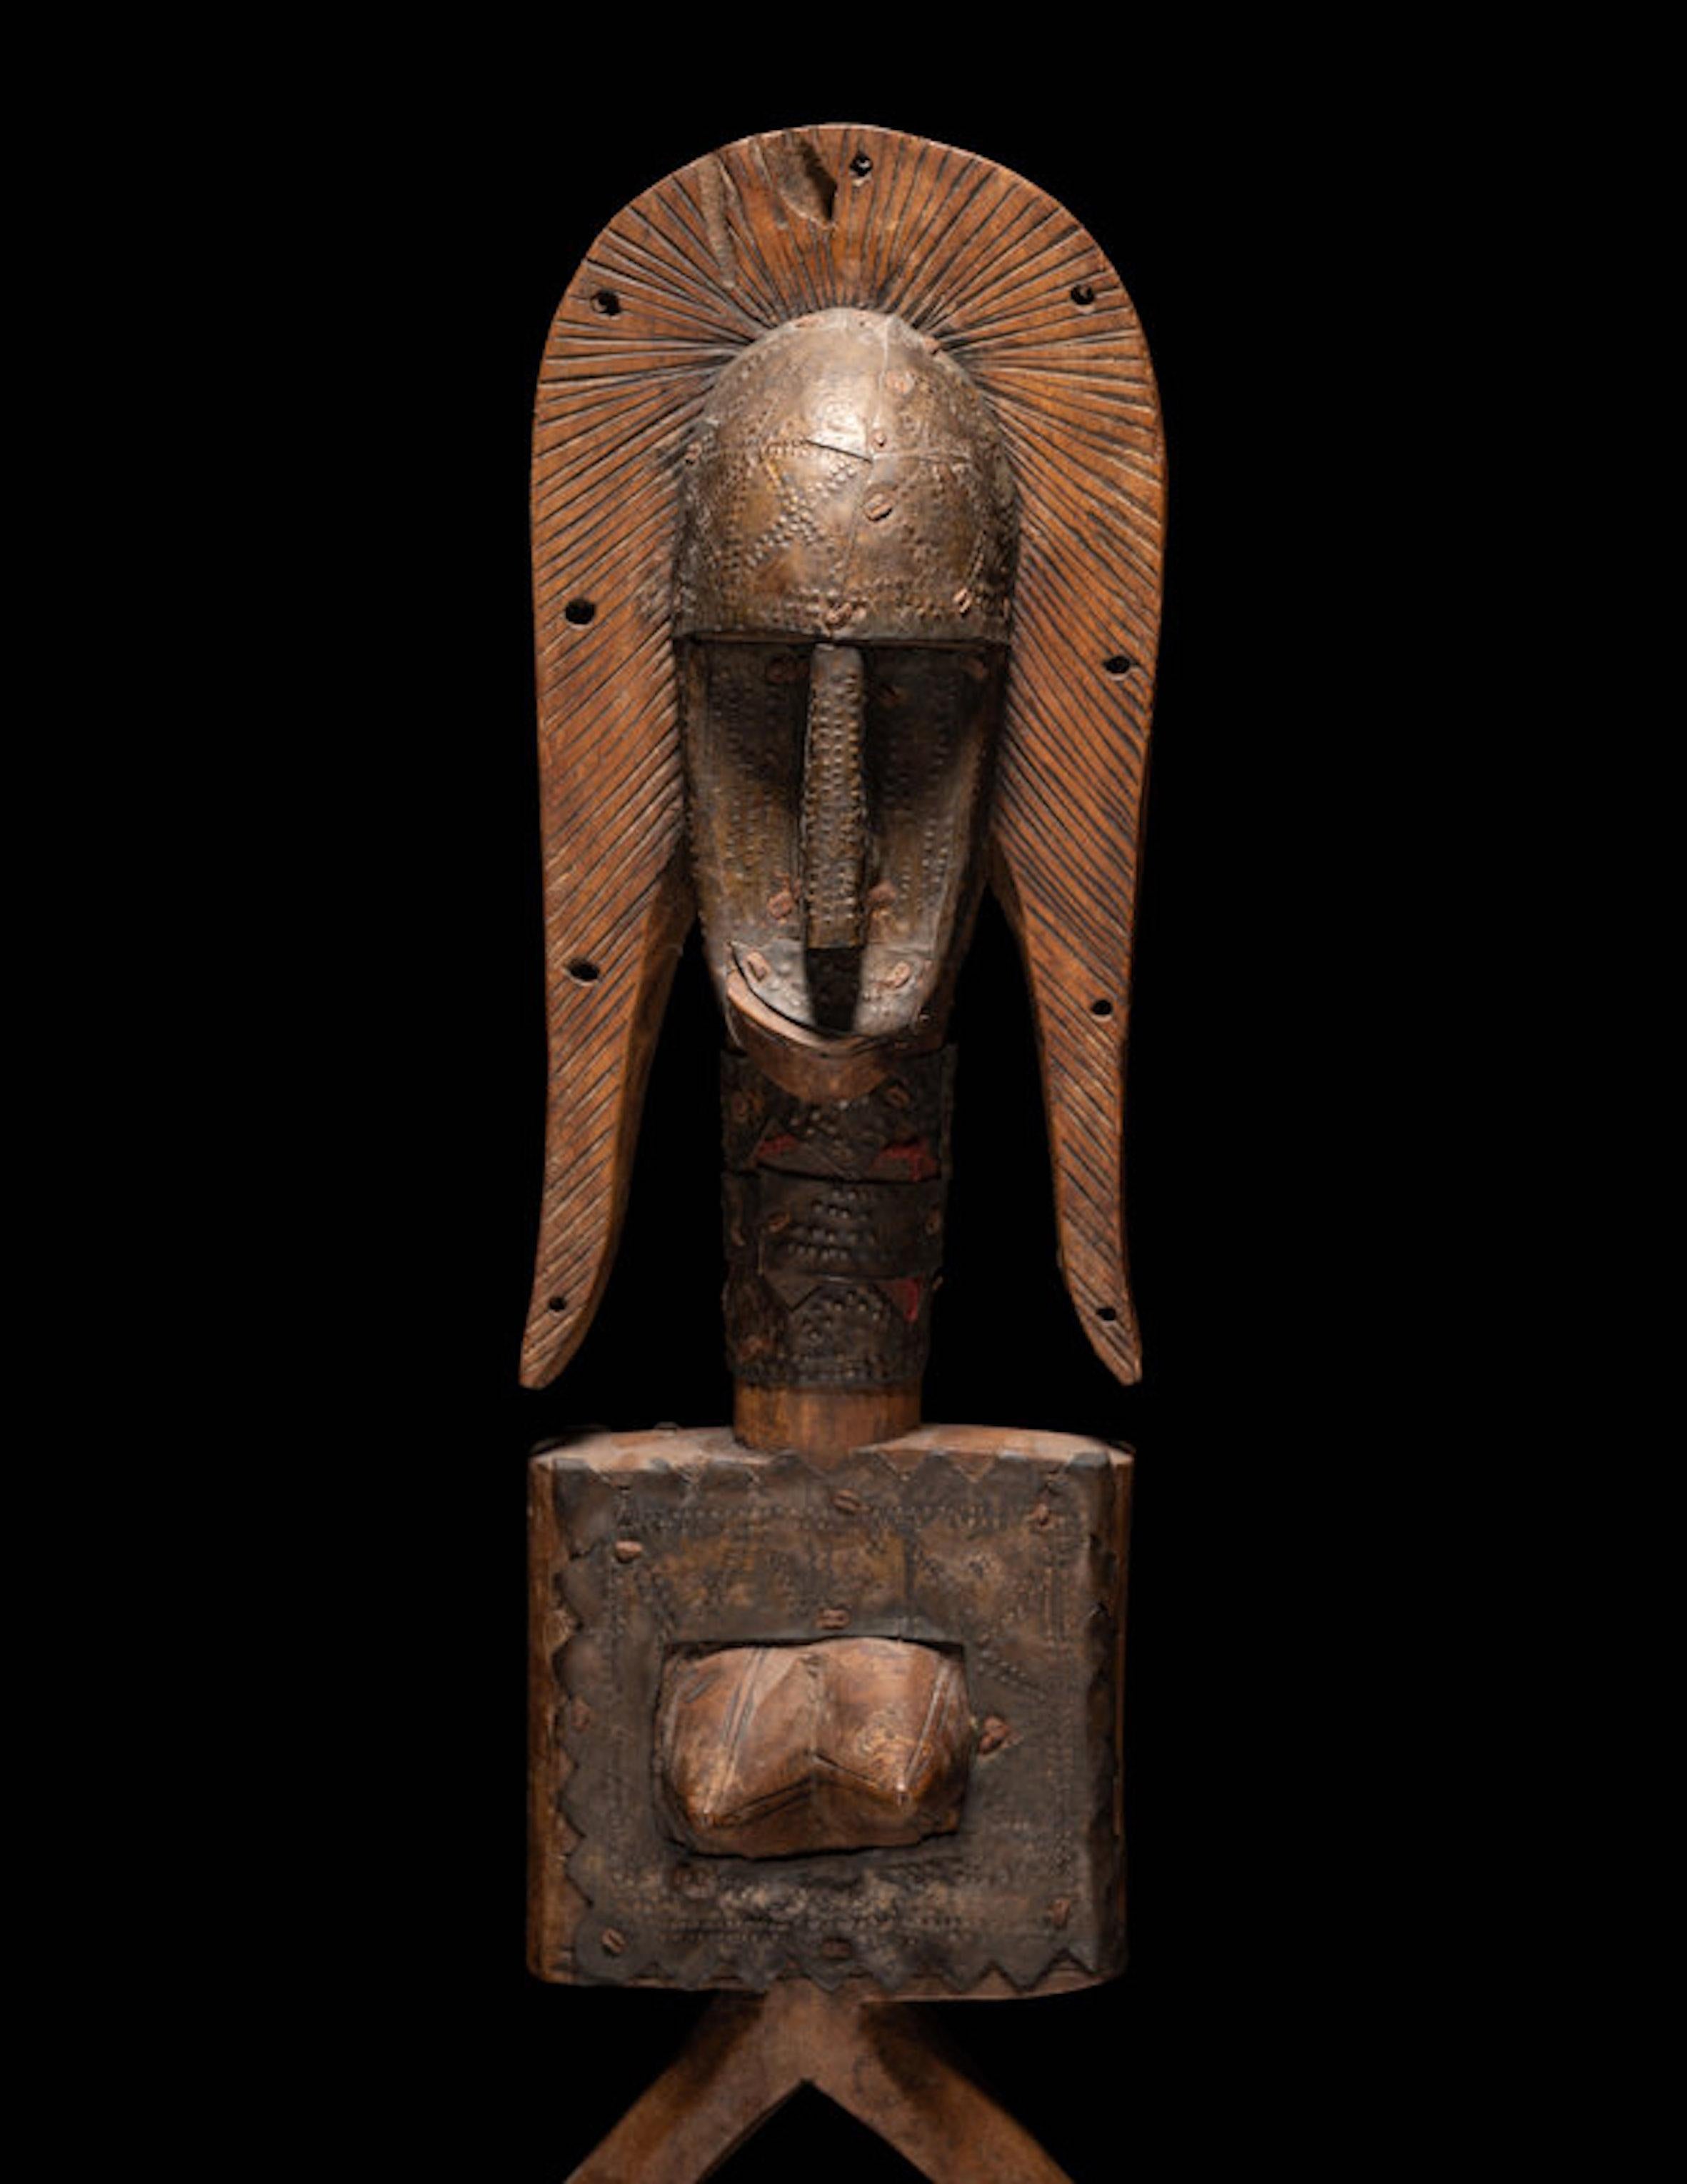 A Bamana Wood Reliquary Guardian Figure West Africa, Mali
Property from the Estate of Paul B. Dombrowski, Monona, Wisconsin.